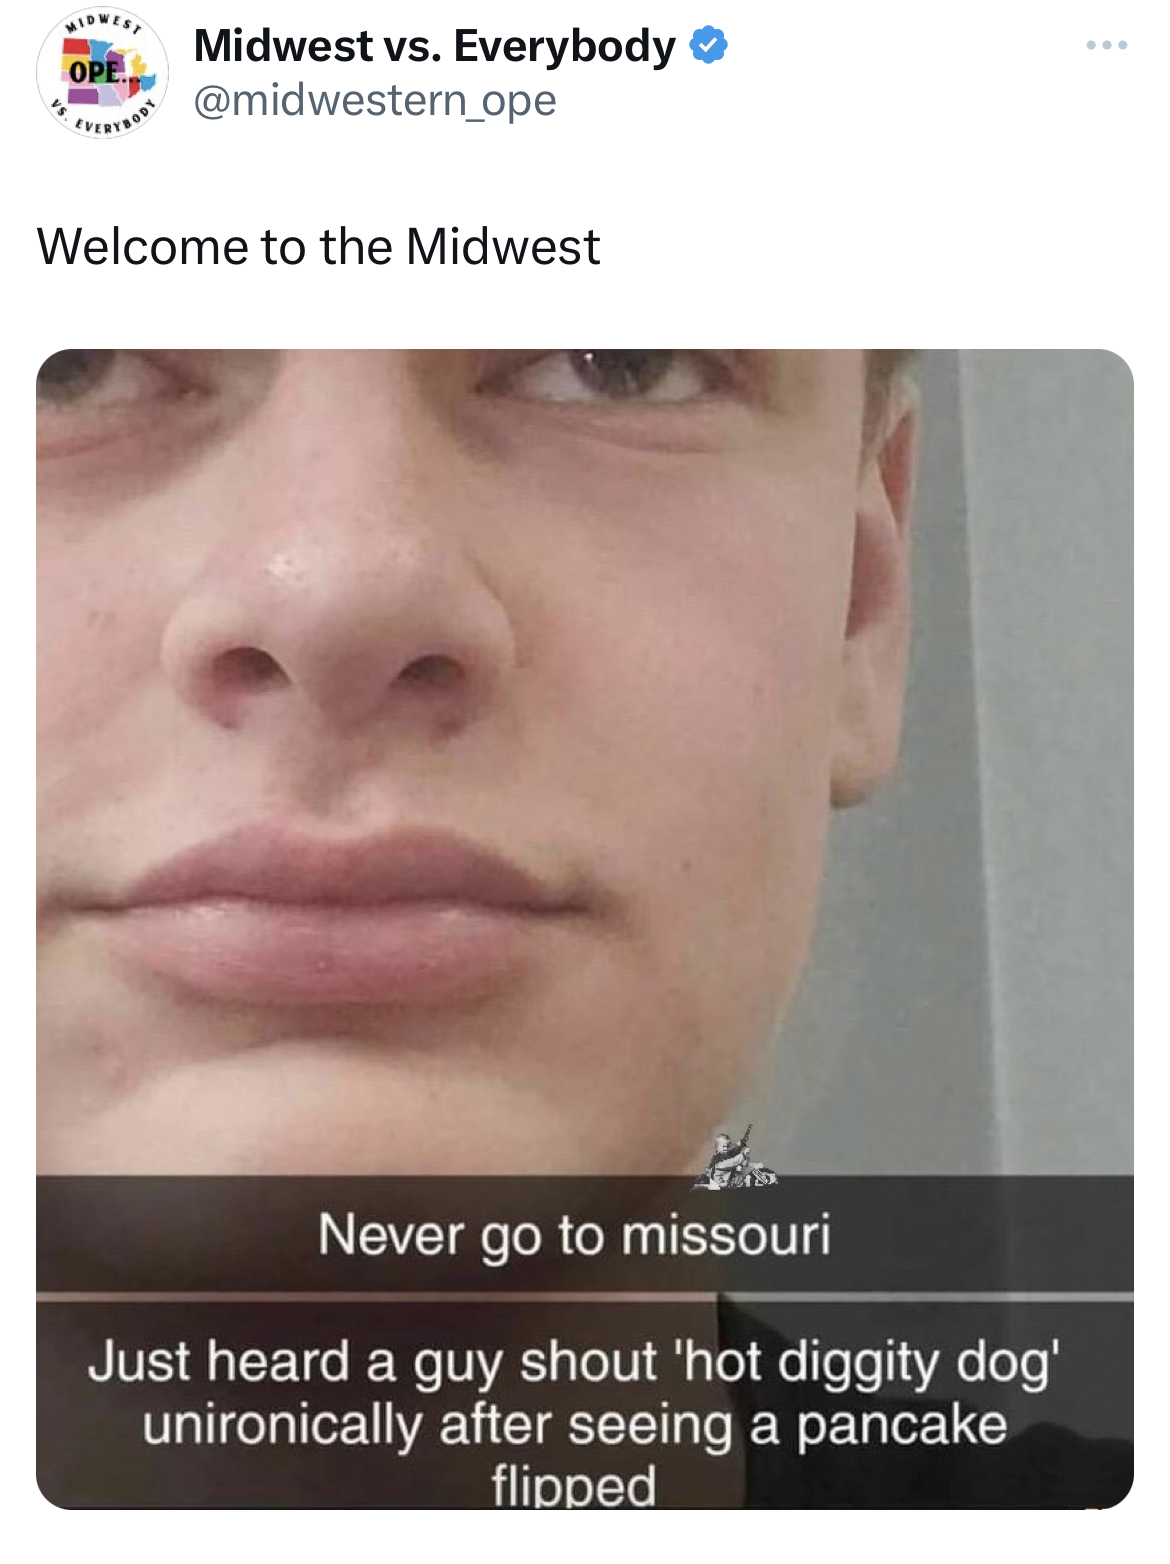 Unhinged Tweets - lip - Ope www Midwest vs. Everybody Welcome to the Midwest Never go to missouri Just heard a guy shout 'hot diggity dog' unironically after seeing a pancake flipped